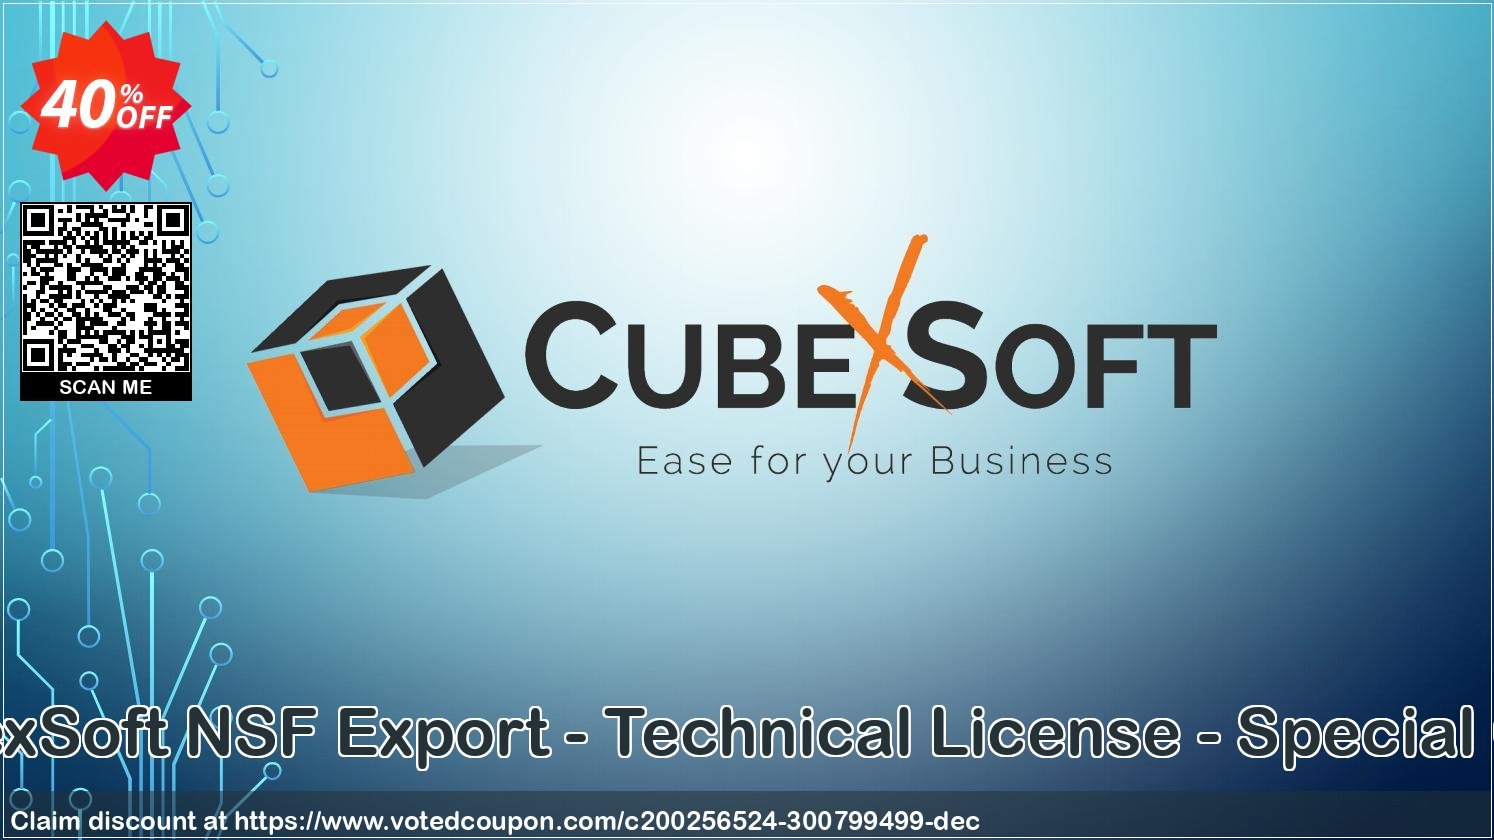 CubexSoft NSF Export - Technical Plan - Special Offer Coupon, discount Coupon code CubexSoft NSF Export - Technical License - Special Offer. Promotion: CubexSoft NSF Export - Technical License - Special Offer offer from CubexSoft Tools Pvt. Ltd.